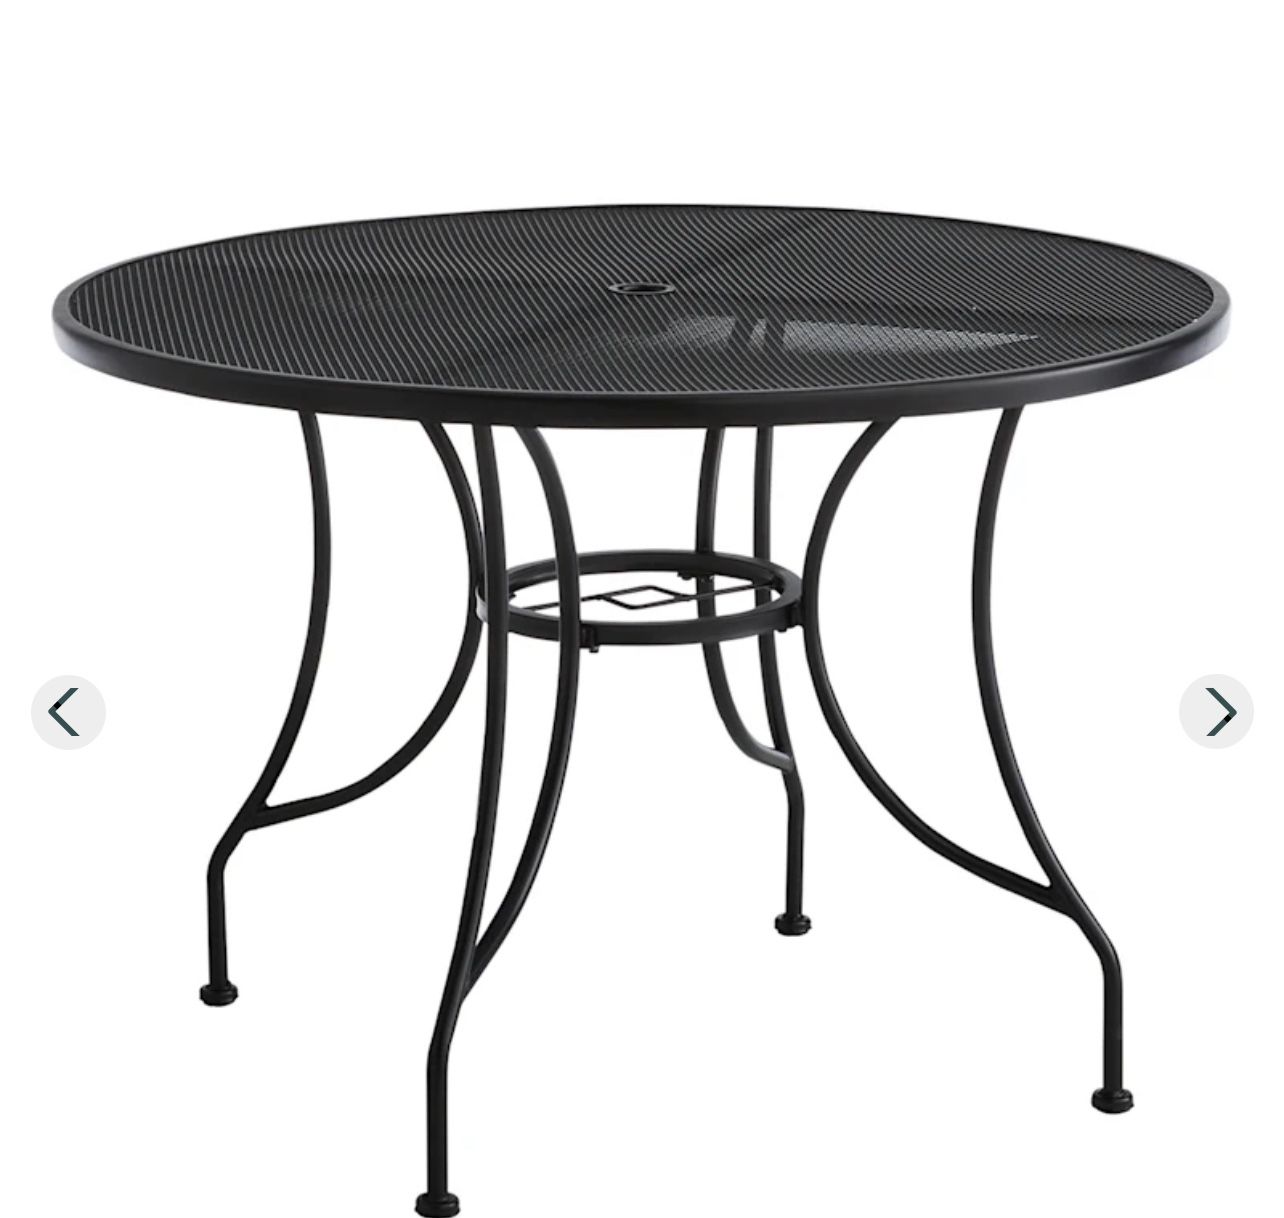 Wrought Iron Patio Table With Chairs. 